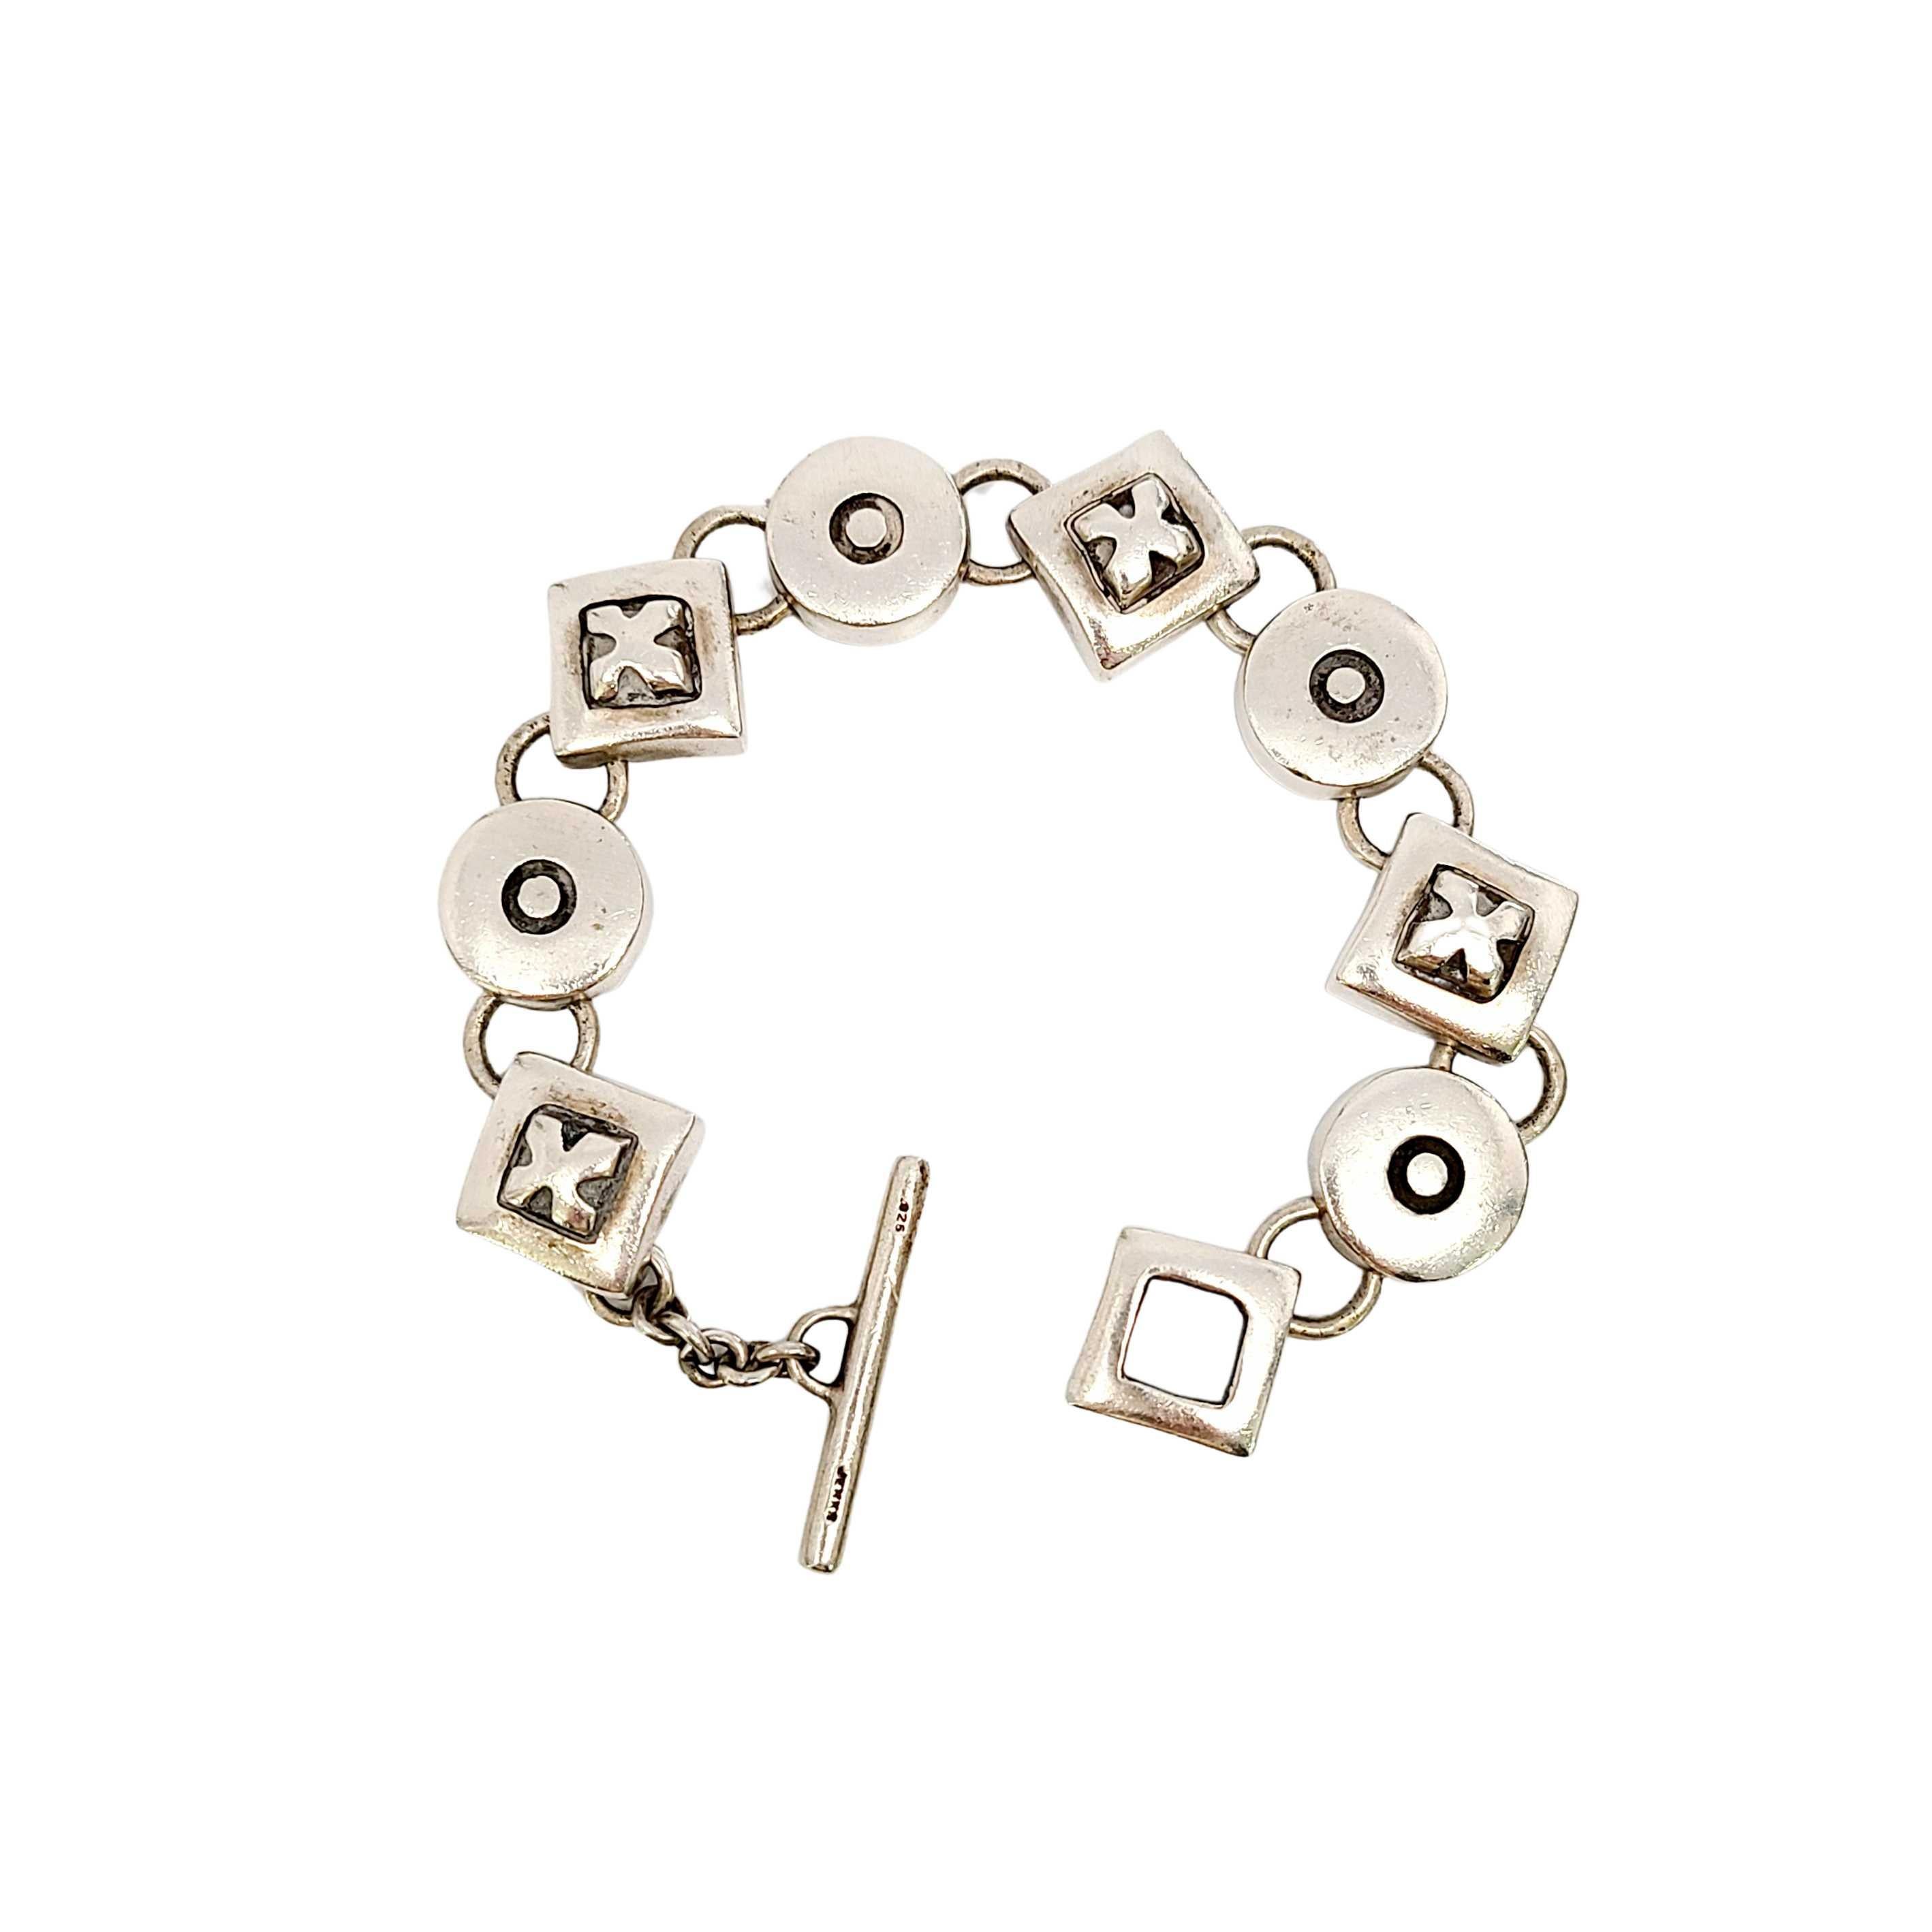 Lisa Jenks sterling silver geometric XO link bracelet.

Bold, modernist and distinctive Jenks design, features alternating X and O links, and a toggle closure.

Measures approx 7 1/2